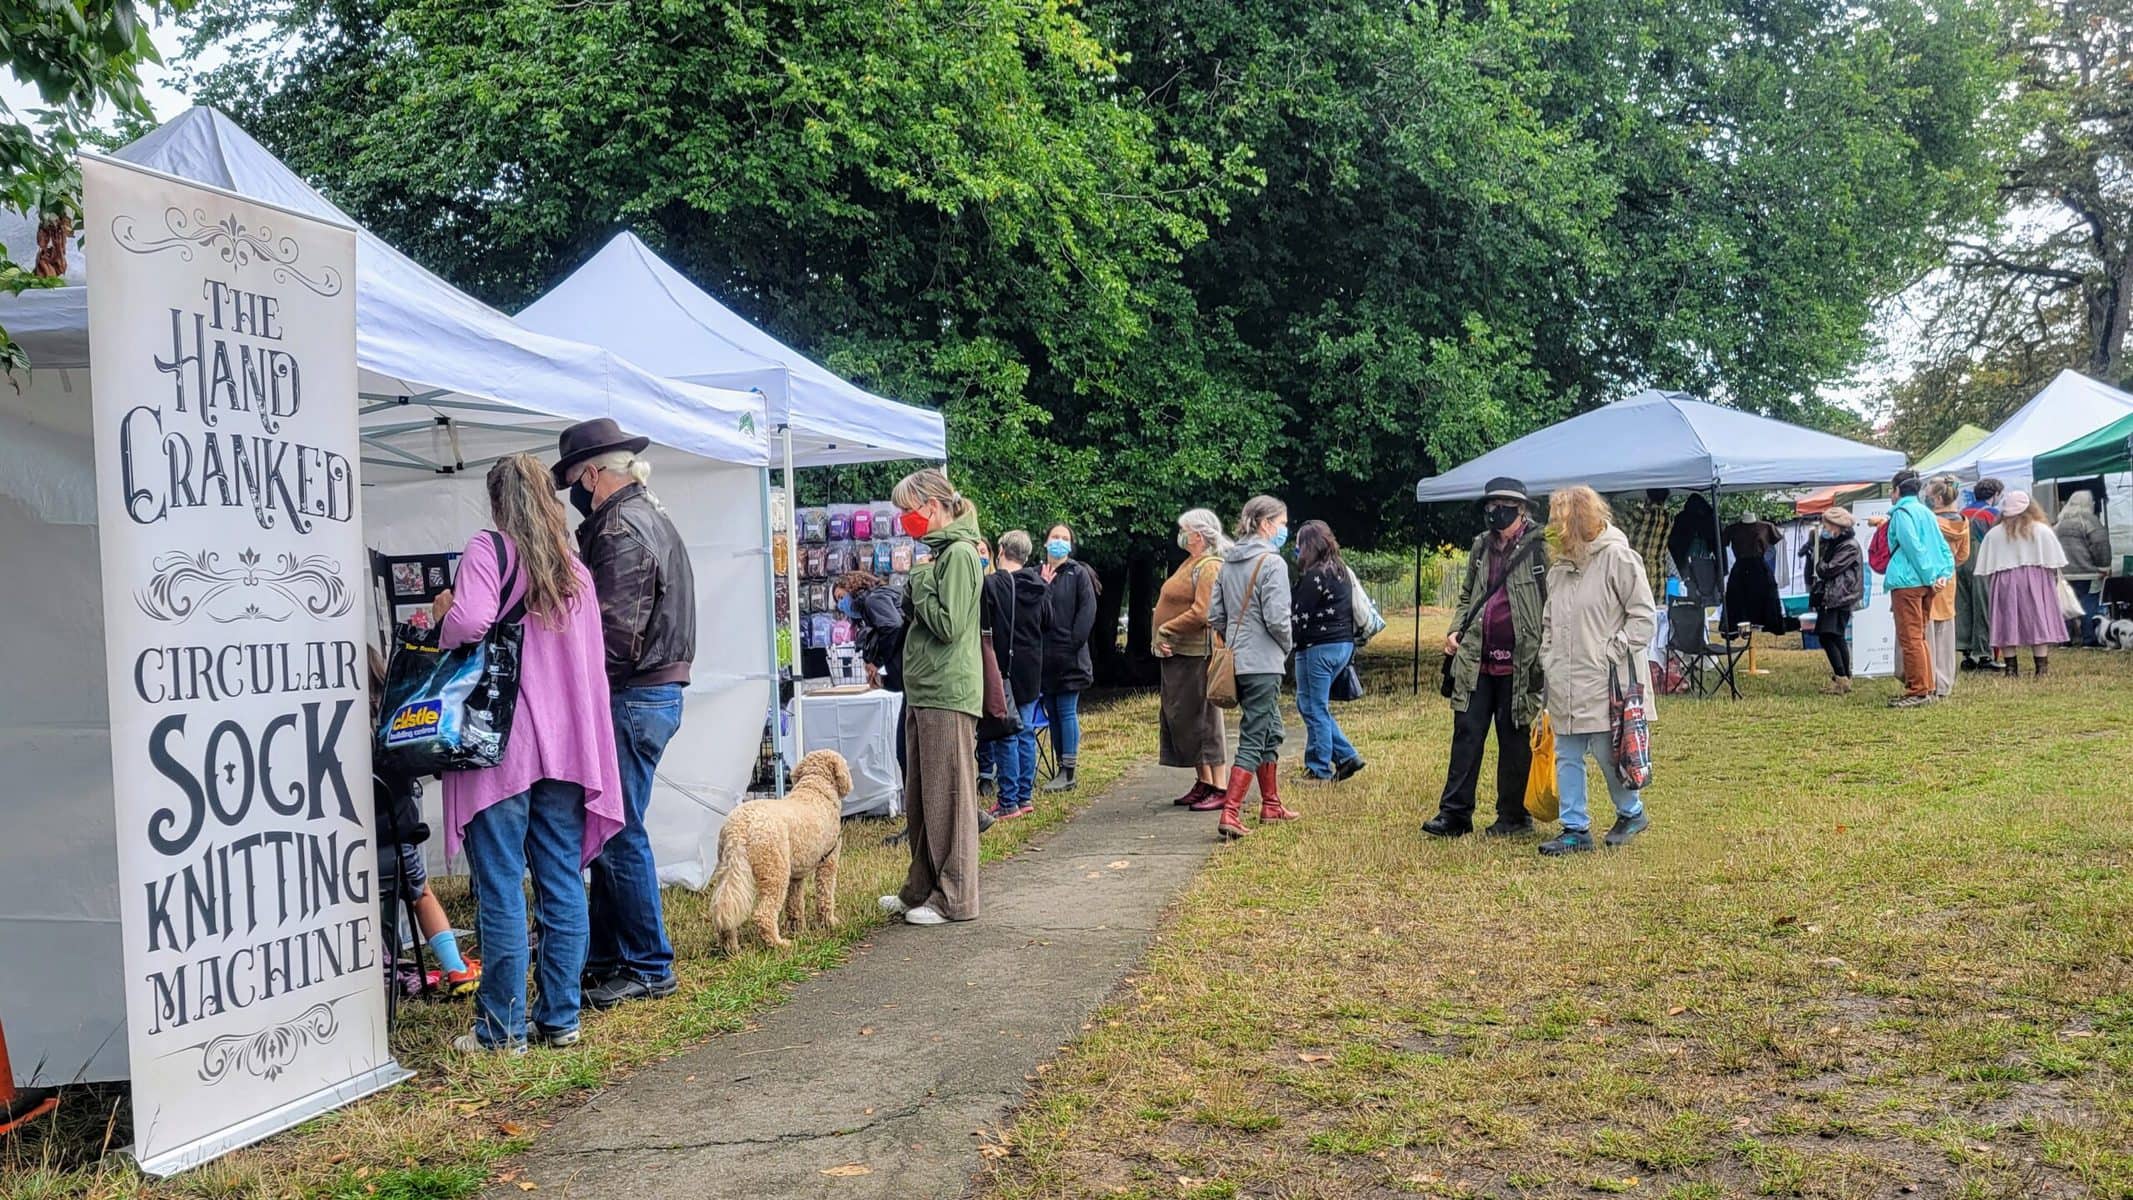 Image description: People milling around at an outdoor festival. A vertical sign on the left reads, "The Hand Cranked Circular Sock Knitting Machine."